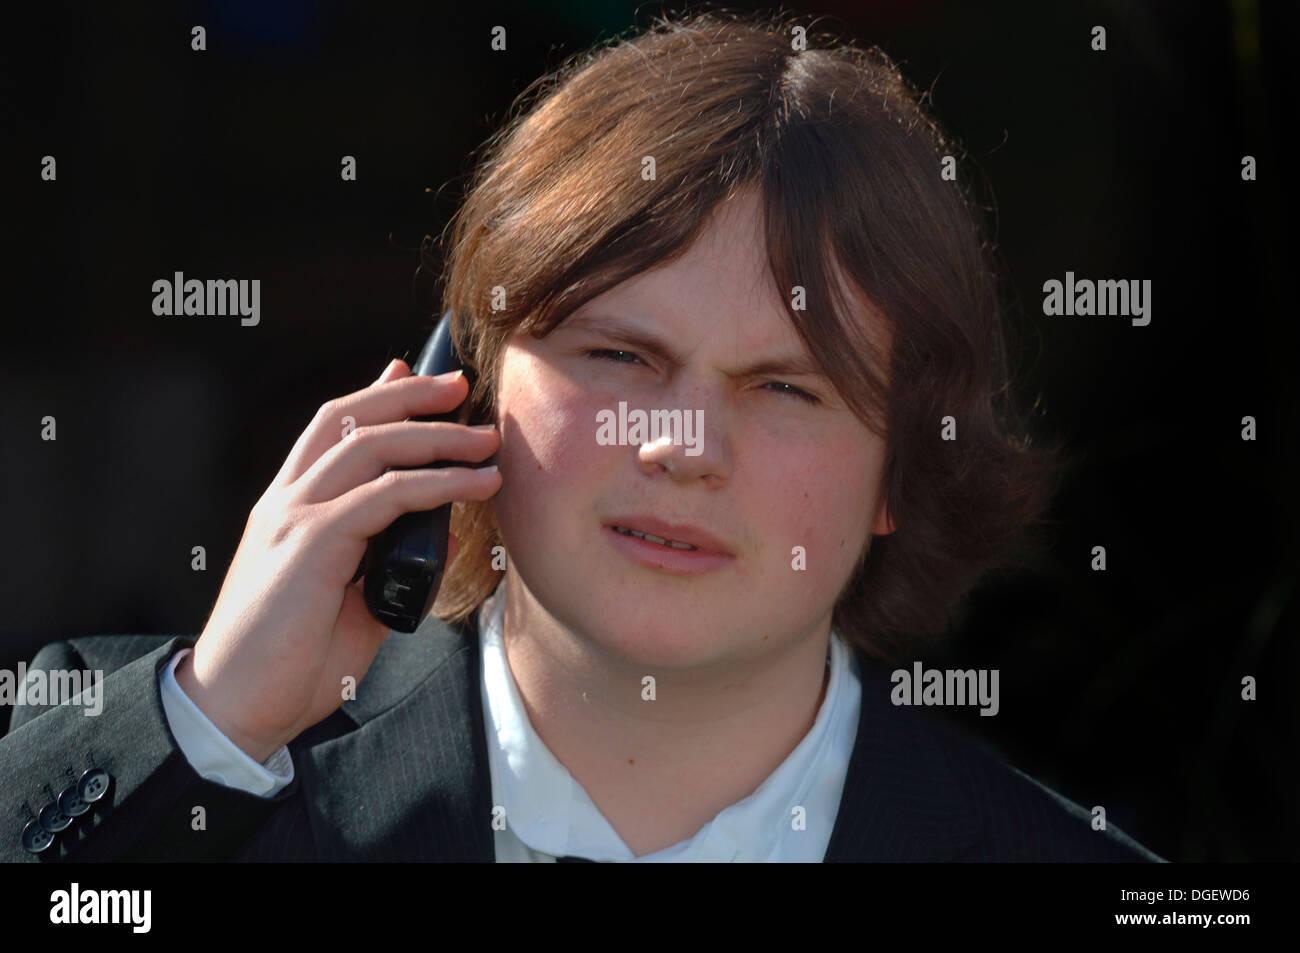 Teenager Using A Mobile Phone. Stock Photo